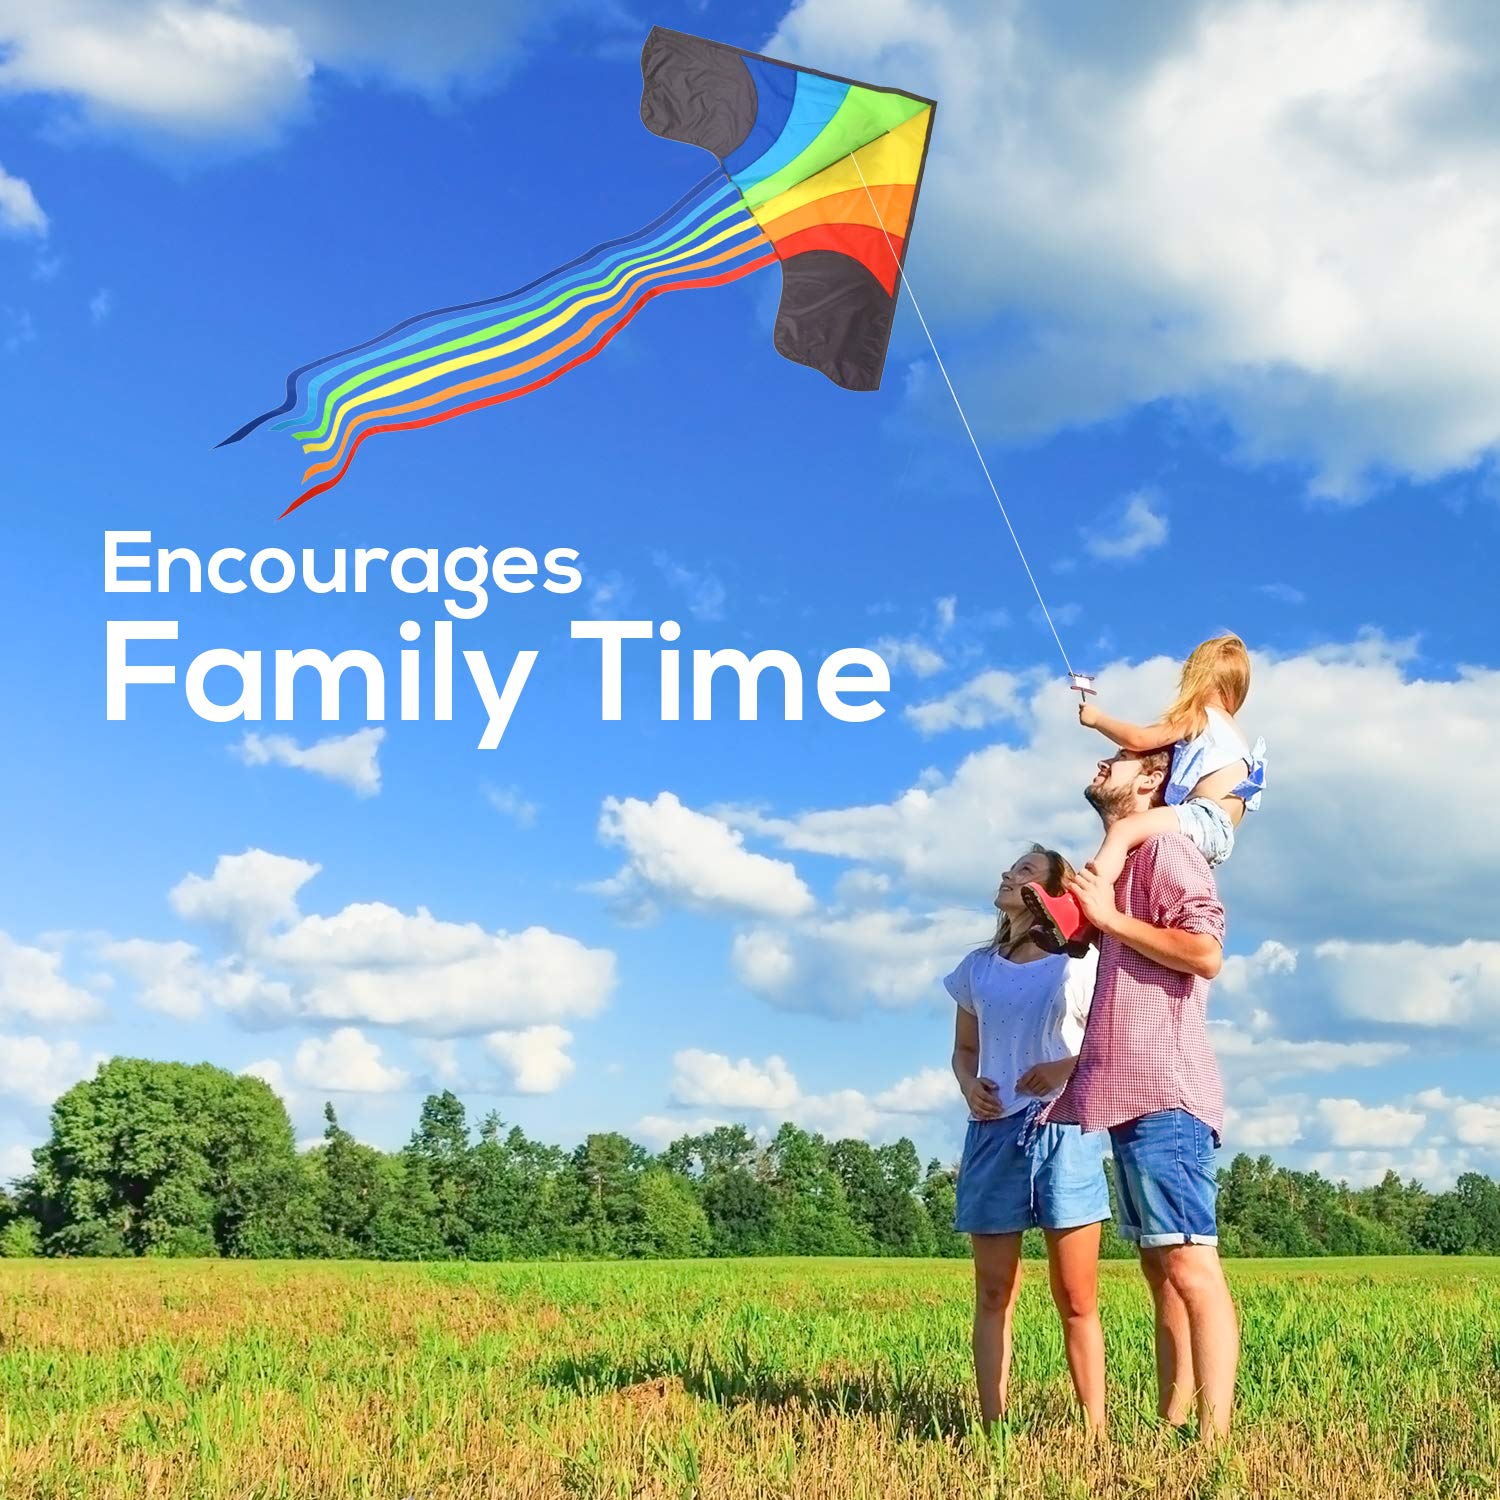 Family Original Rainbow Kite For Children And Adults Very Easy To Fly Kite 